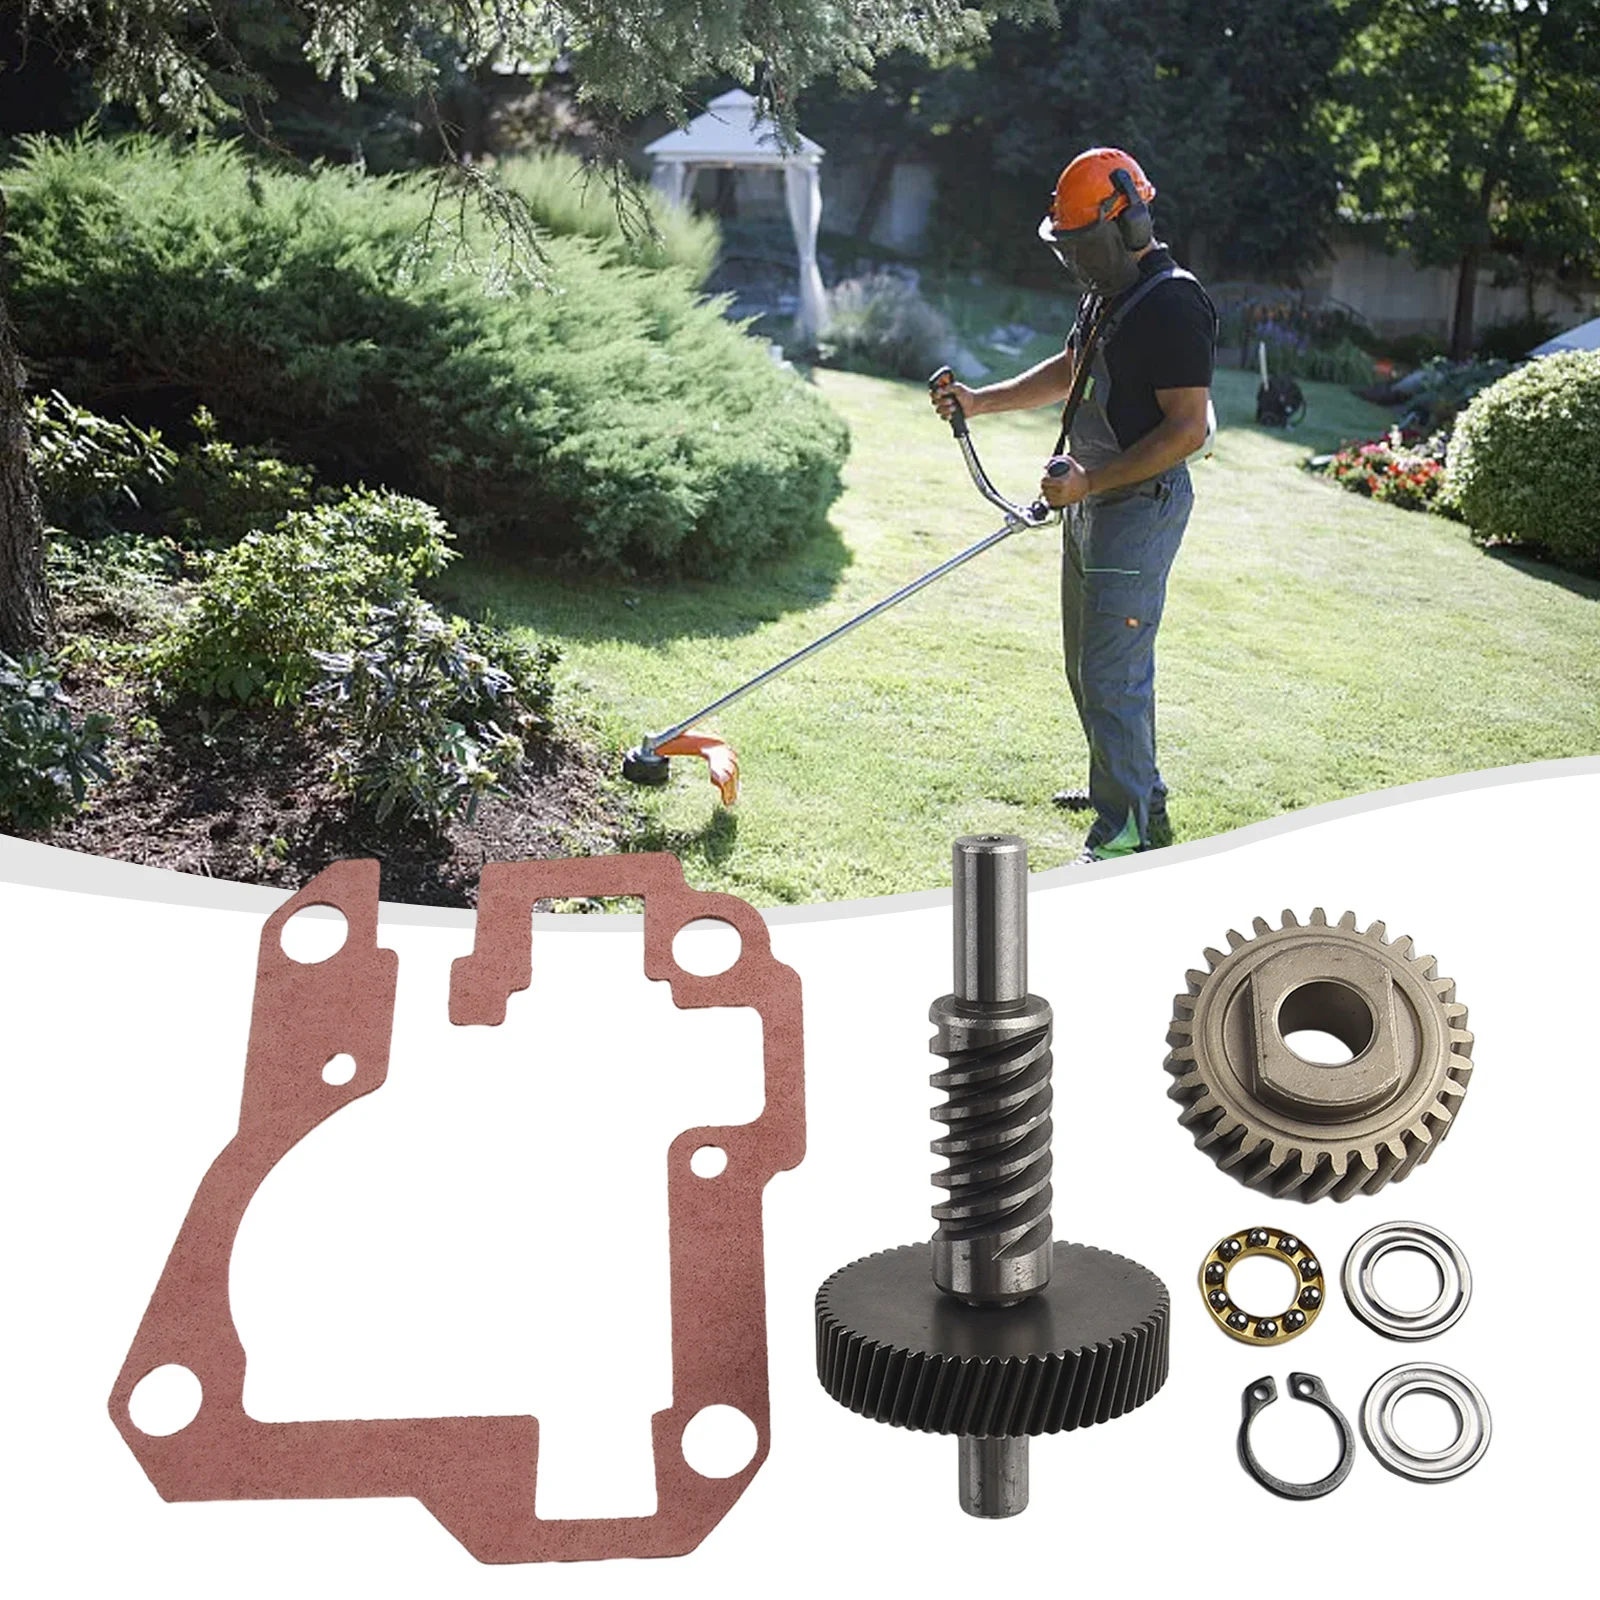 

Snap Ring Set Worm Gear Kit Chainsaw Garden Supplies Lawn Mower Metal Outdoor Replacement Yard 9706529 W11086780